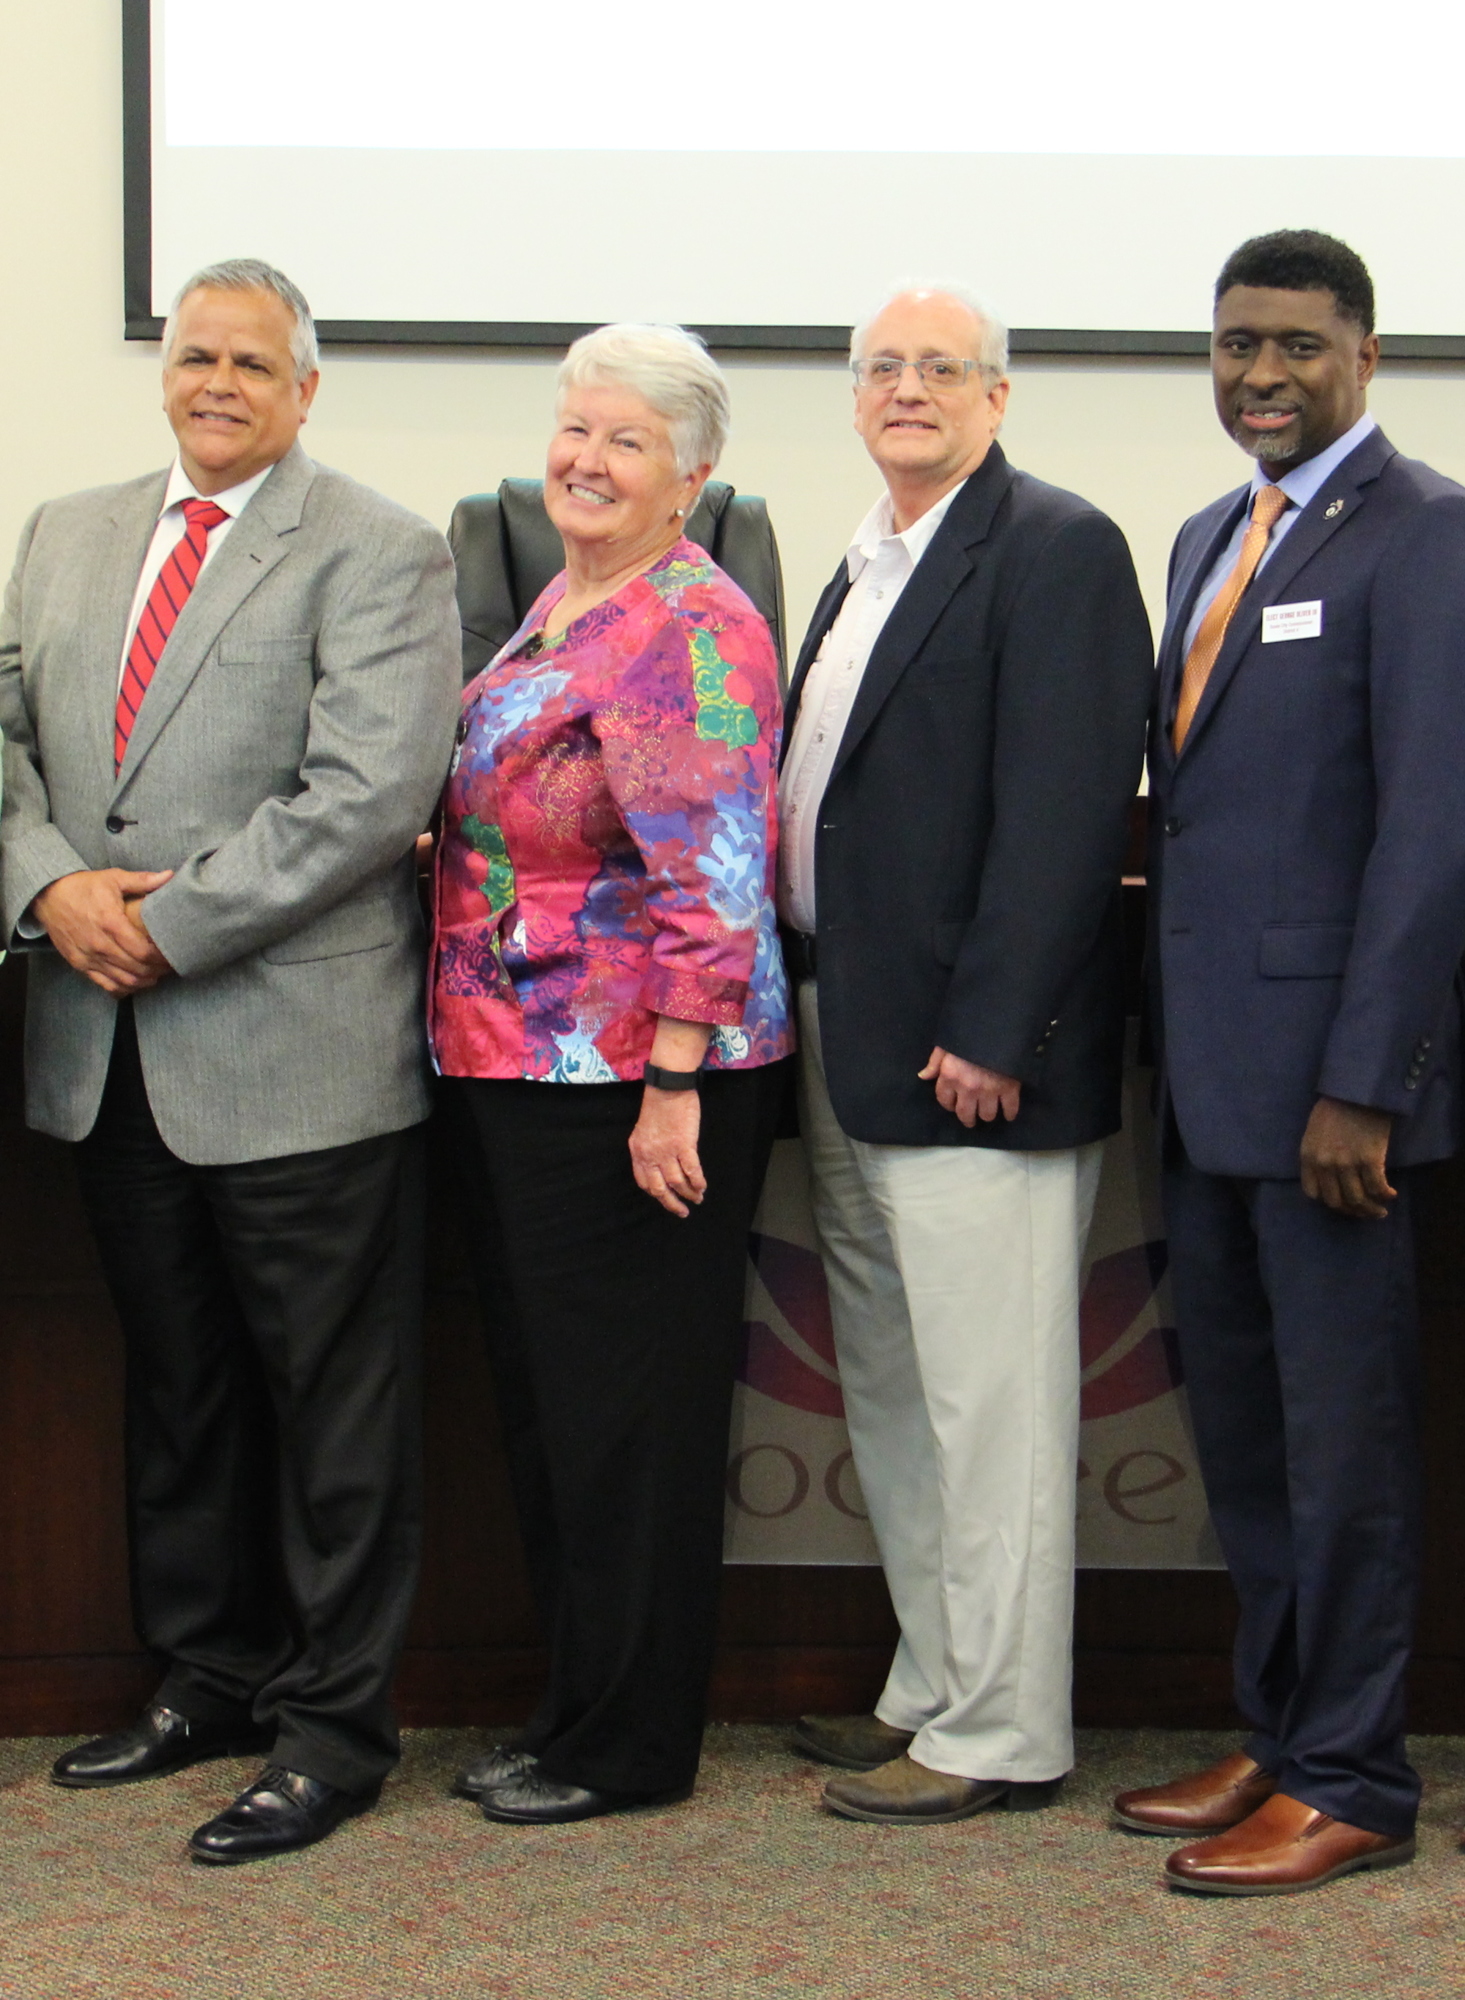 Left to right, District 2 challenger Robert Rivera, District 2 incumbent Rosemary Wilsen, District 4 incumbent Joel F. Keller and District 4 challenger George Oliver III posed for a group photo.